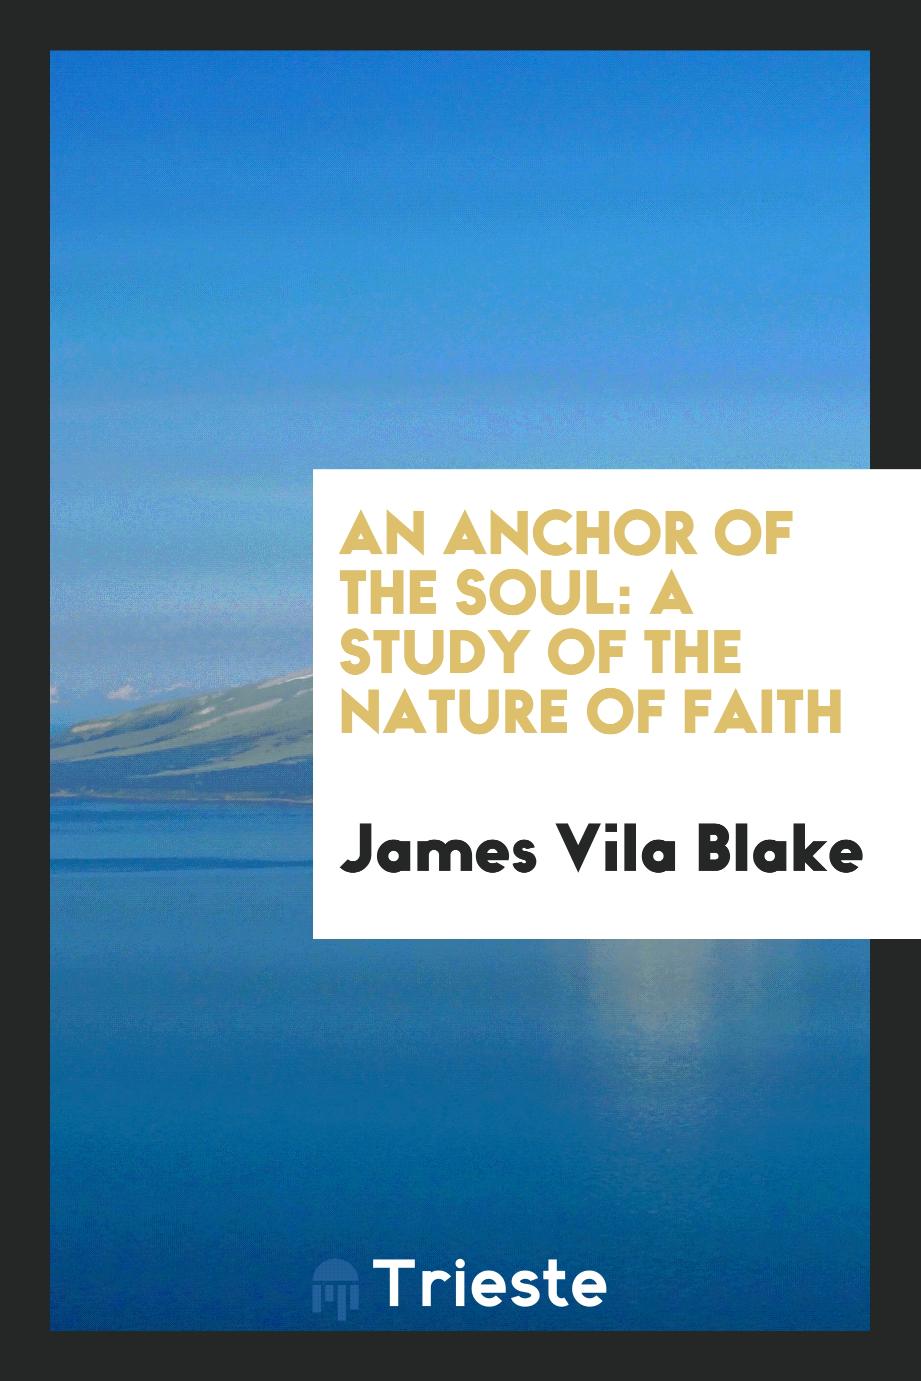 An Anchor of the Soul: A Study of the Nature of Faith